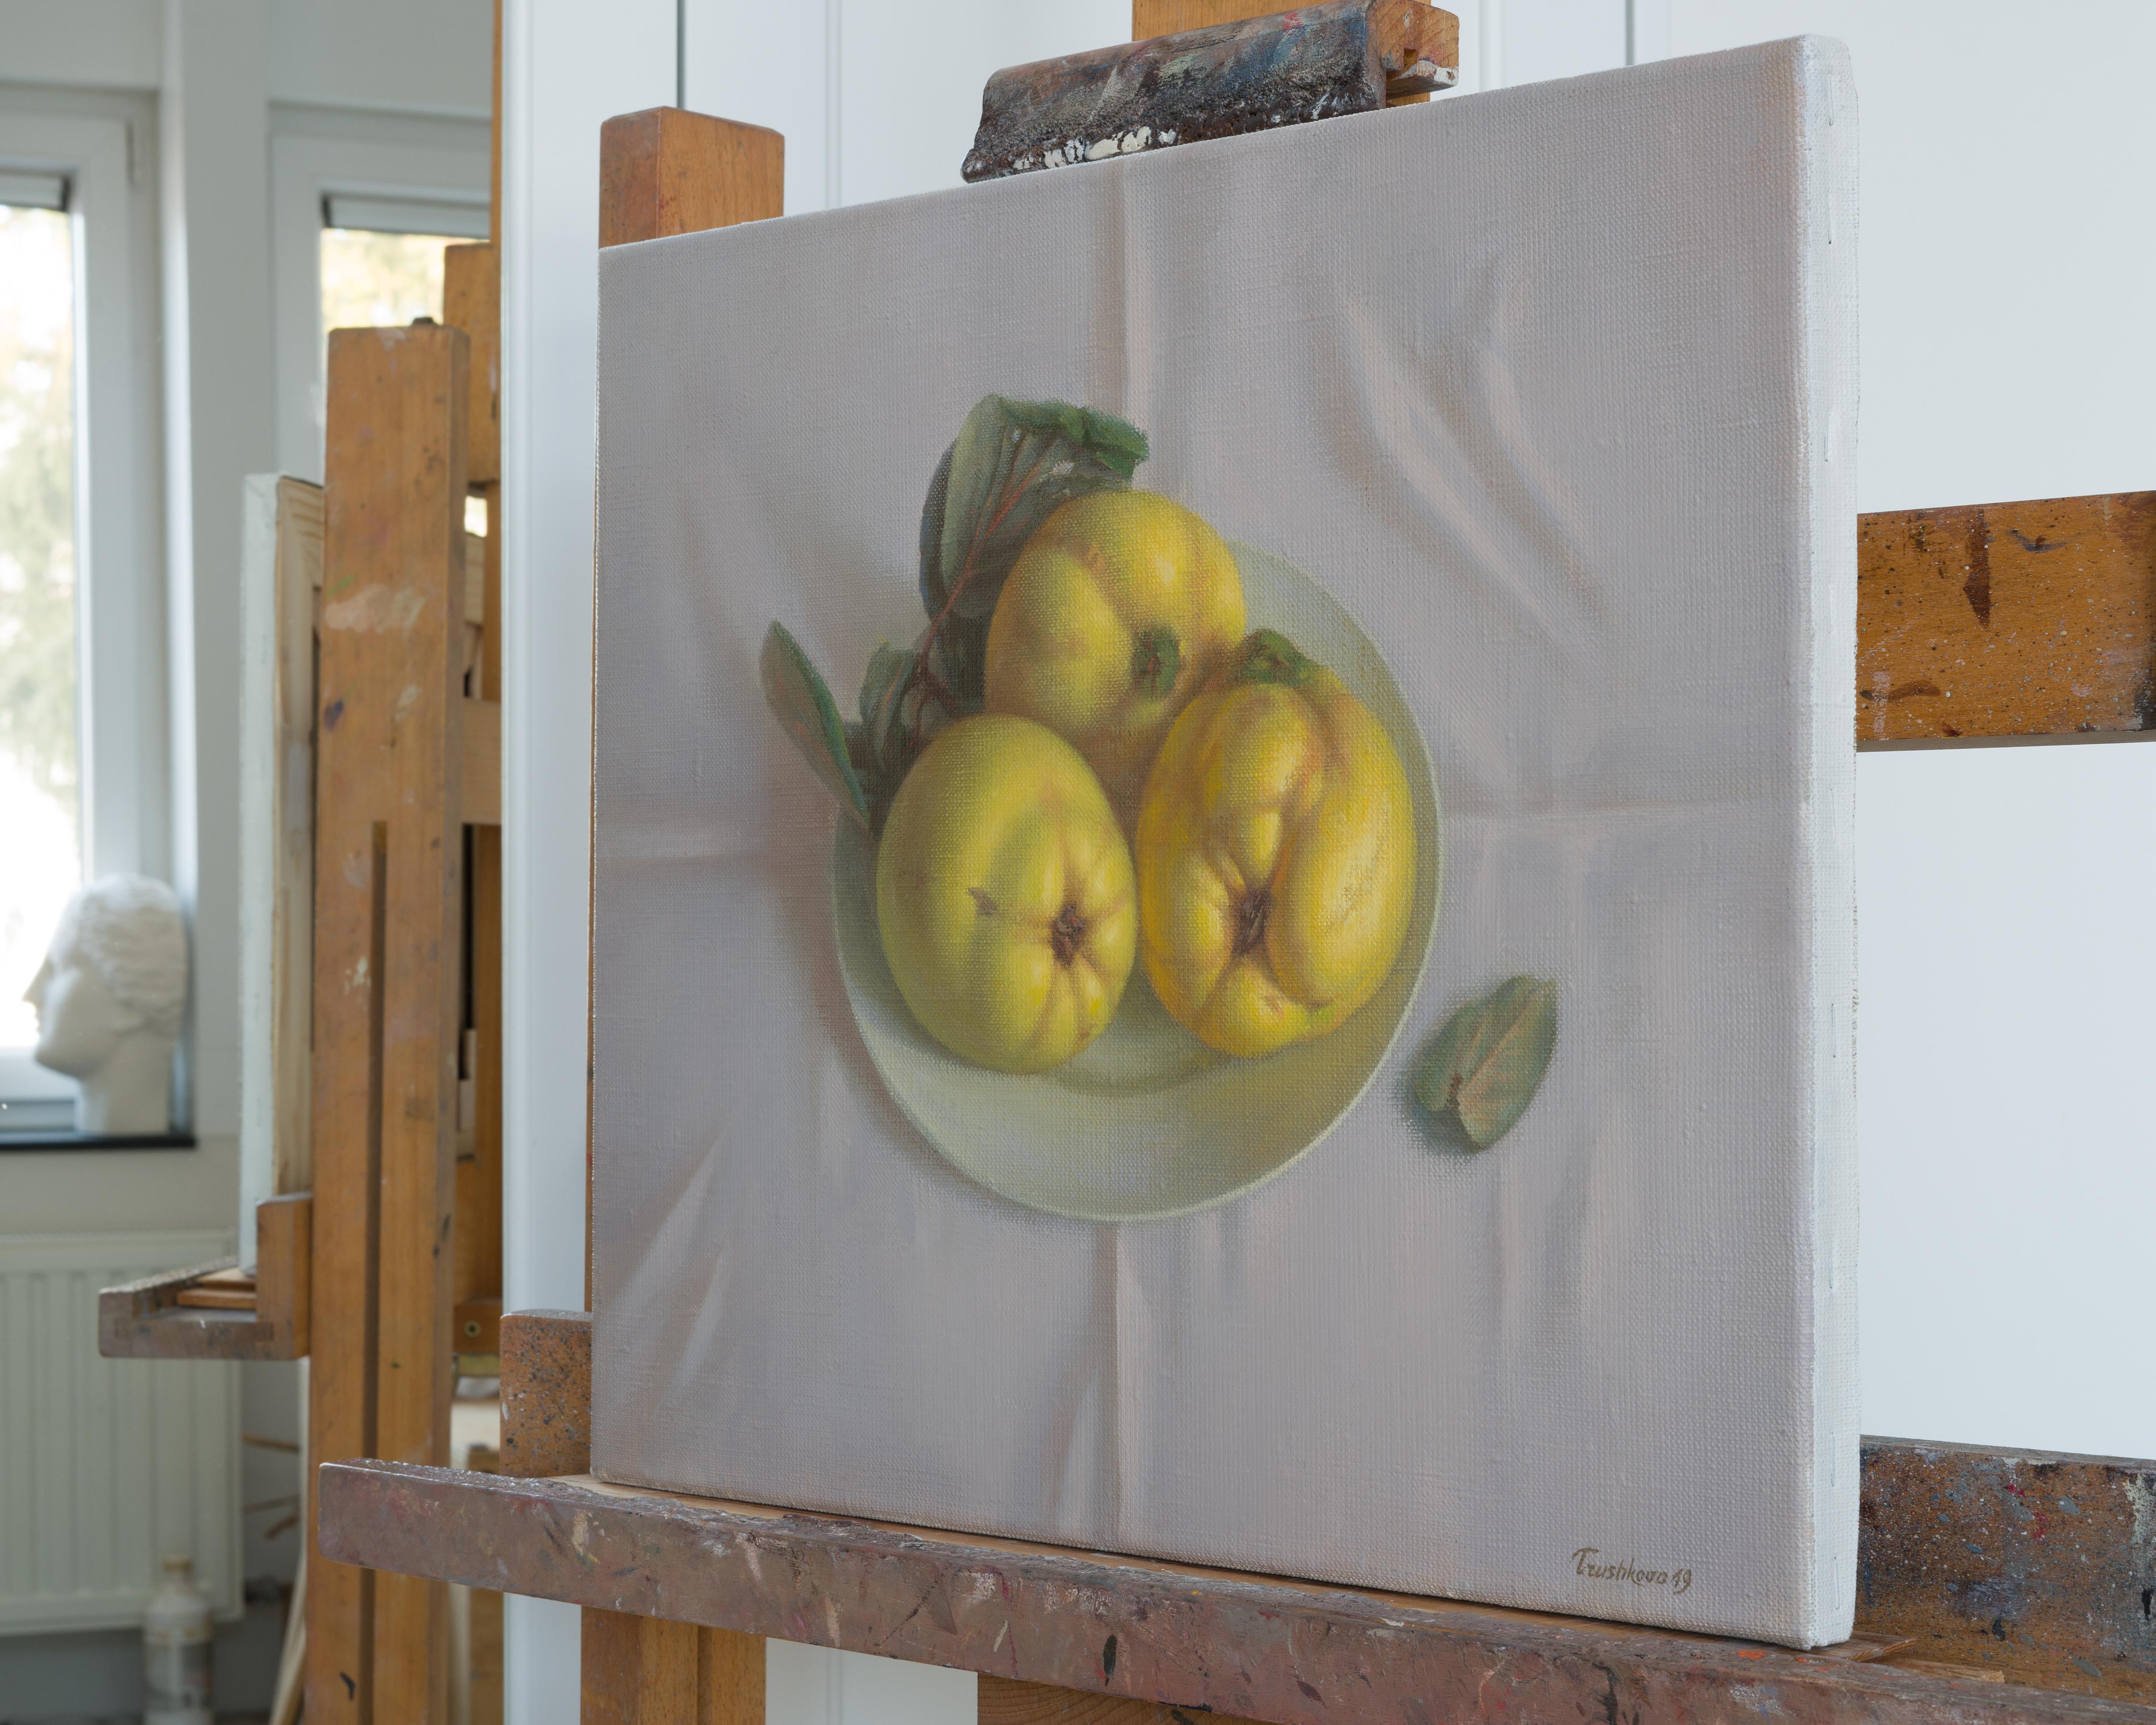 Since my study time at the Krasnodar Art Academy I’ve always had a love for still life. It is especially his quiet simplicity that attracts me together with the focus on composition, lighting and color harmony. The beautiful gold color of fruits and